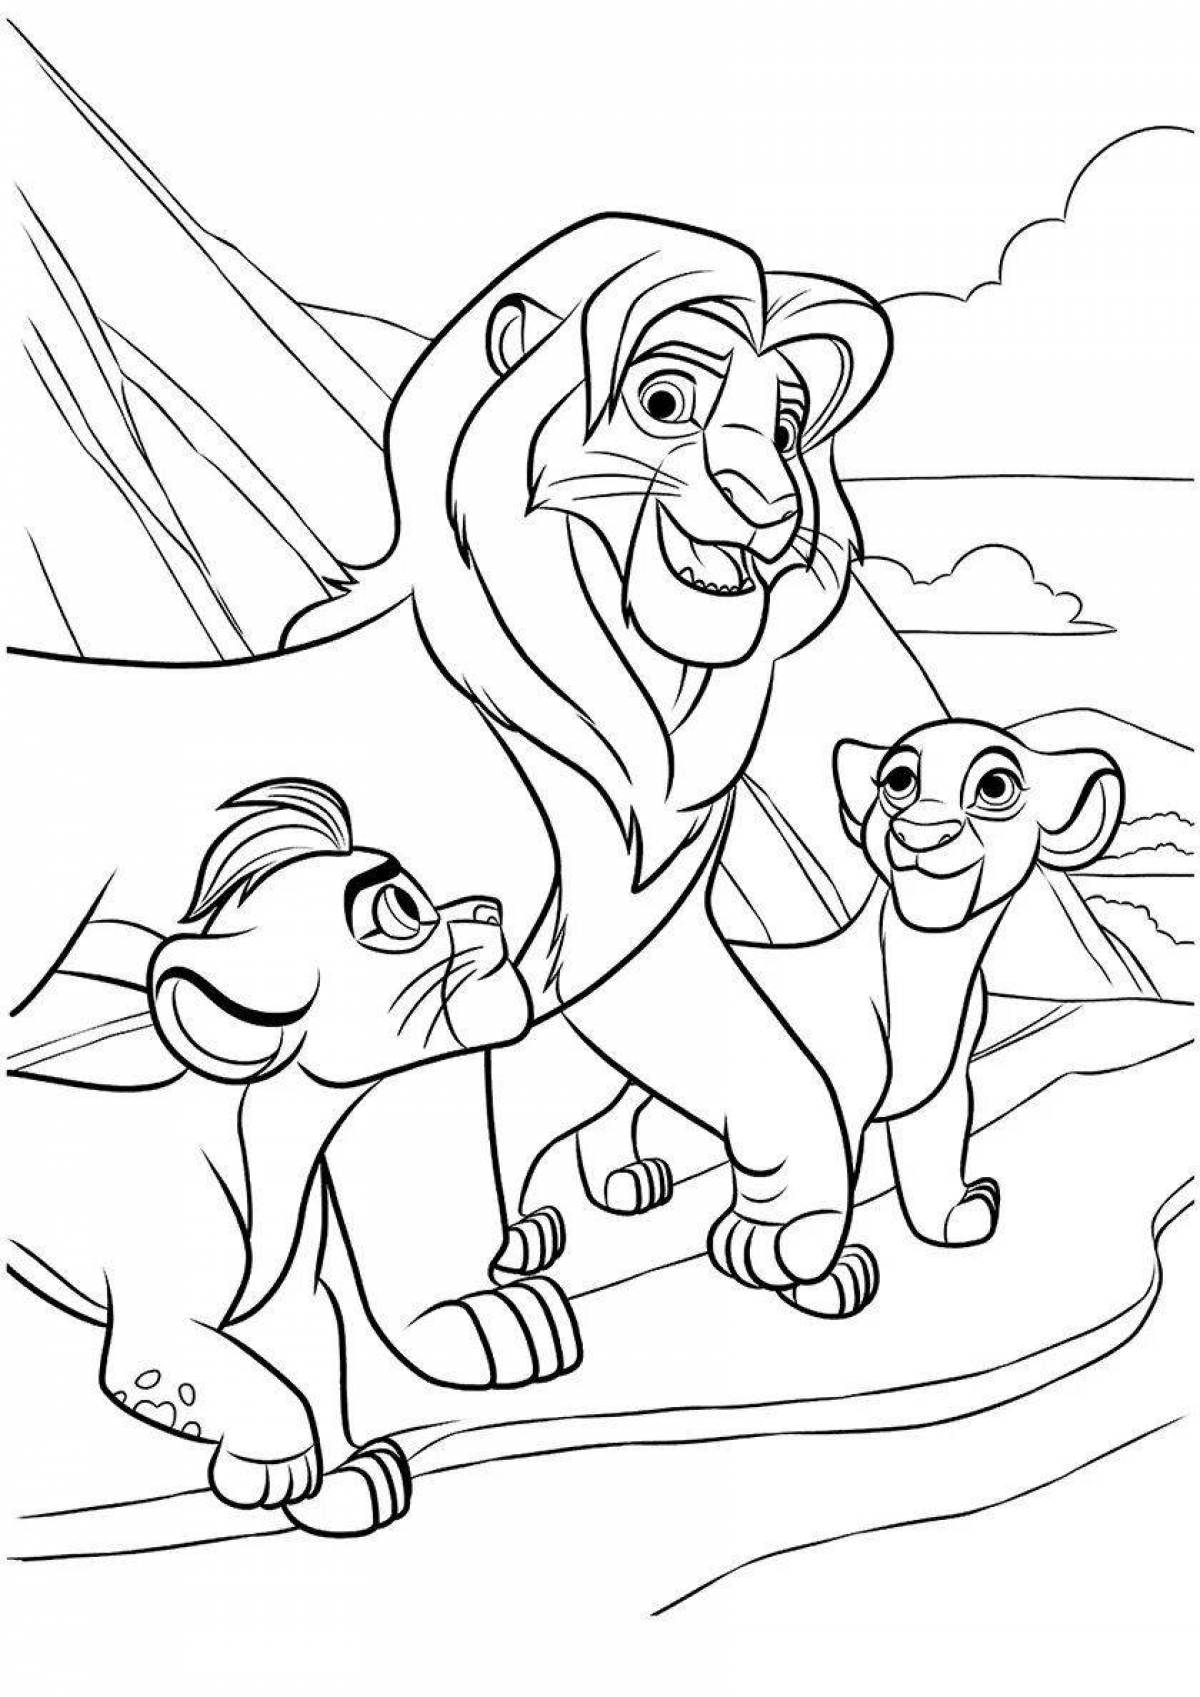 Coloring book magnanimous lion king